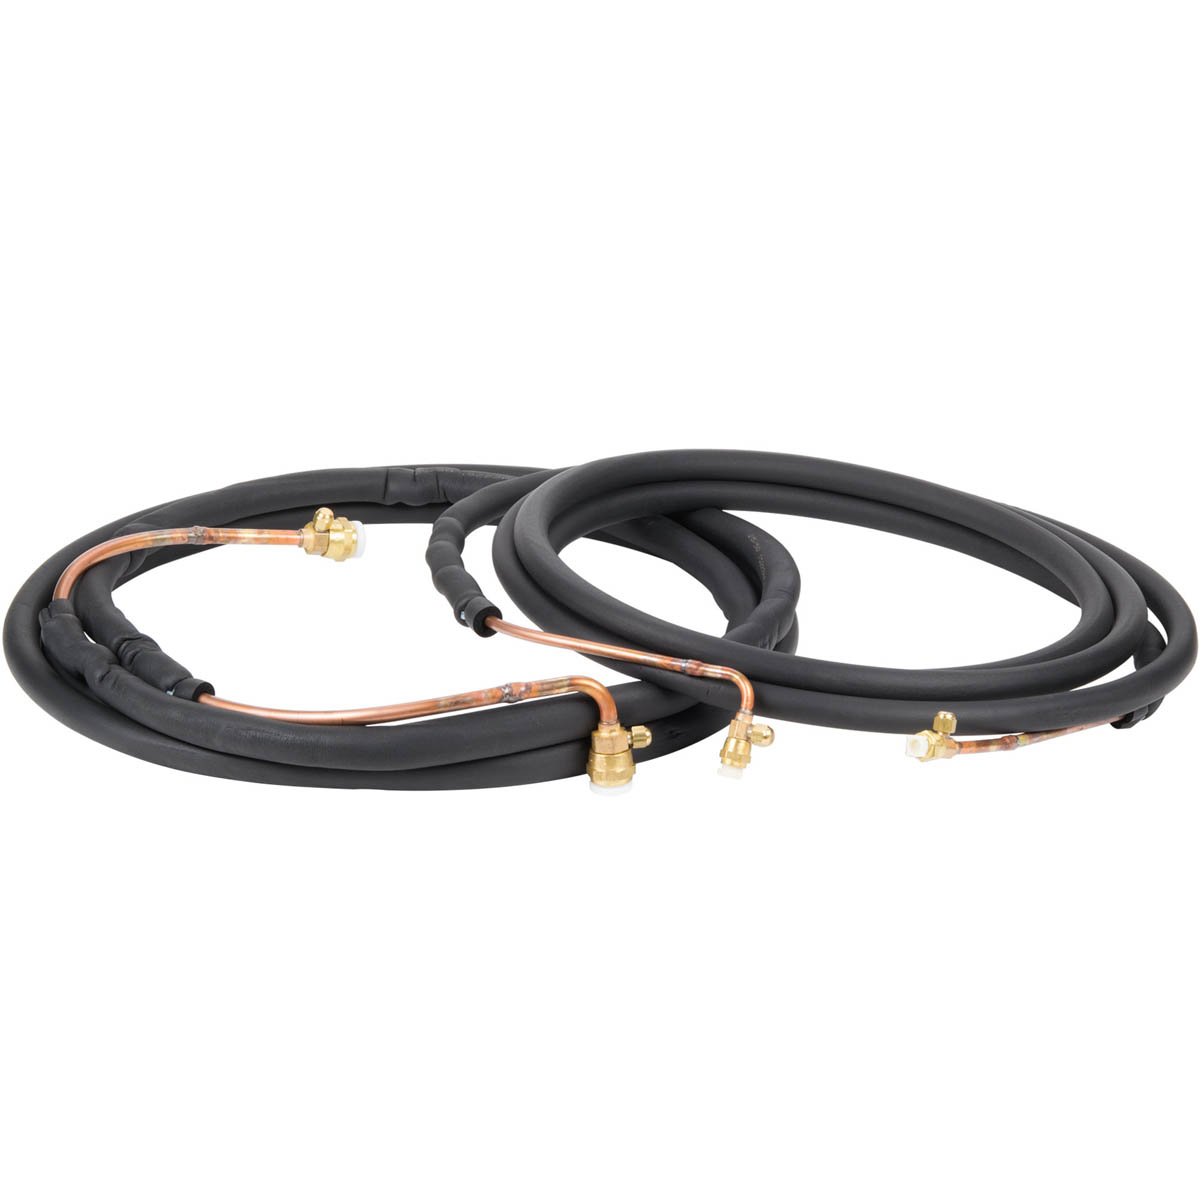 Koolaire RL20R410A Tubing Kit, 20 ft./6.1m (K_T-1700), pre-charged with quick connects